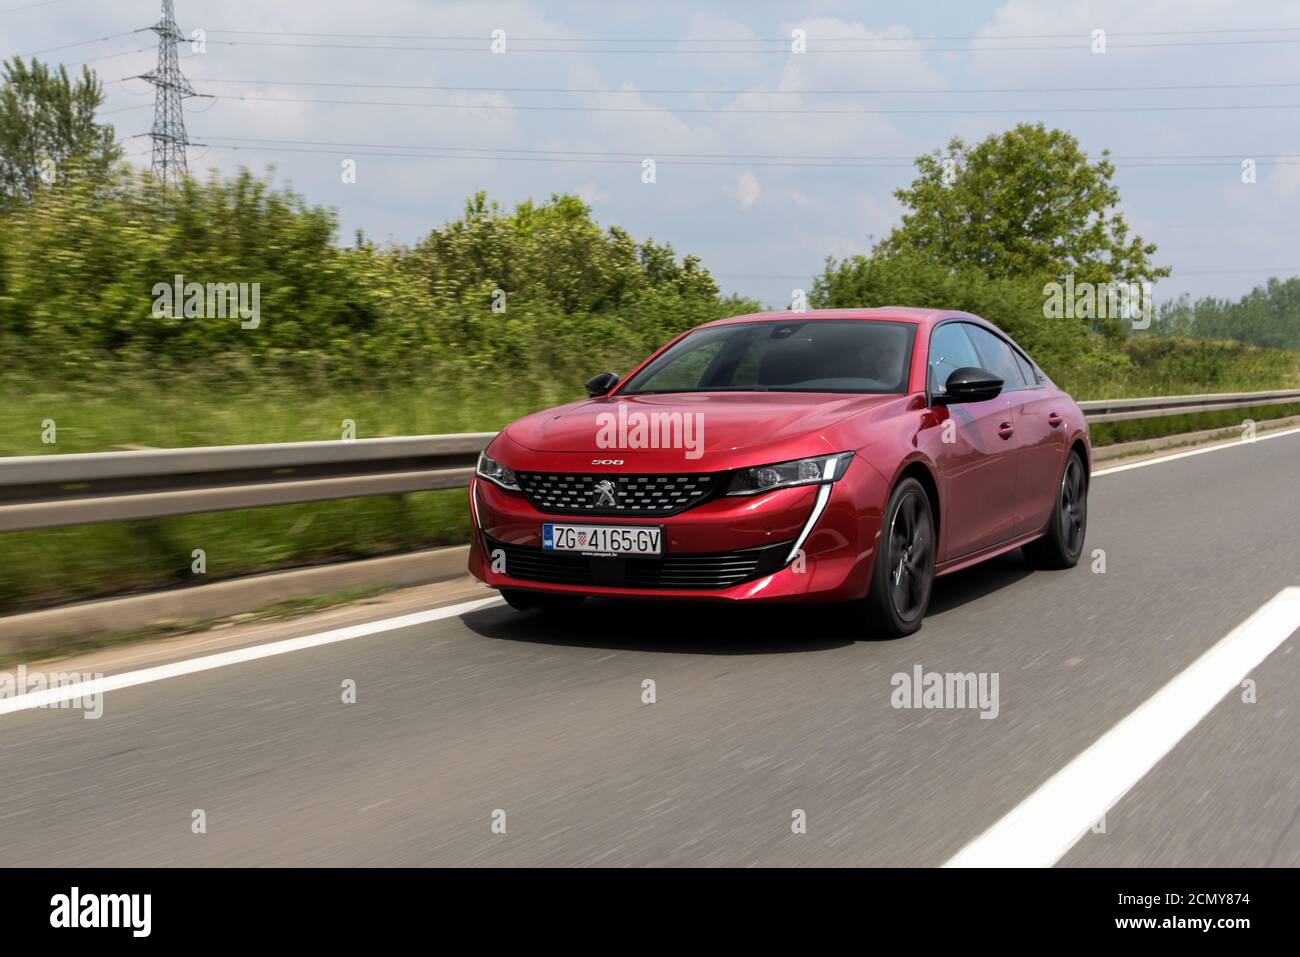 Brand New Peugeot 508 GT in beautiful red colour. Luxury business class limousine. Stock Photo